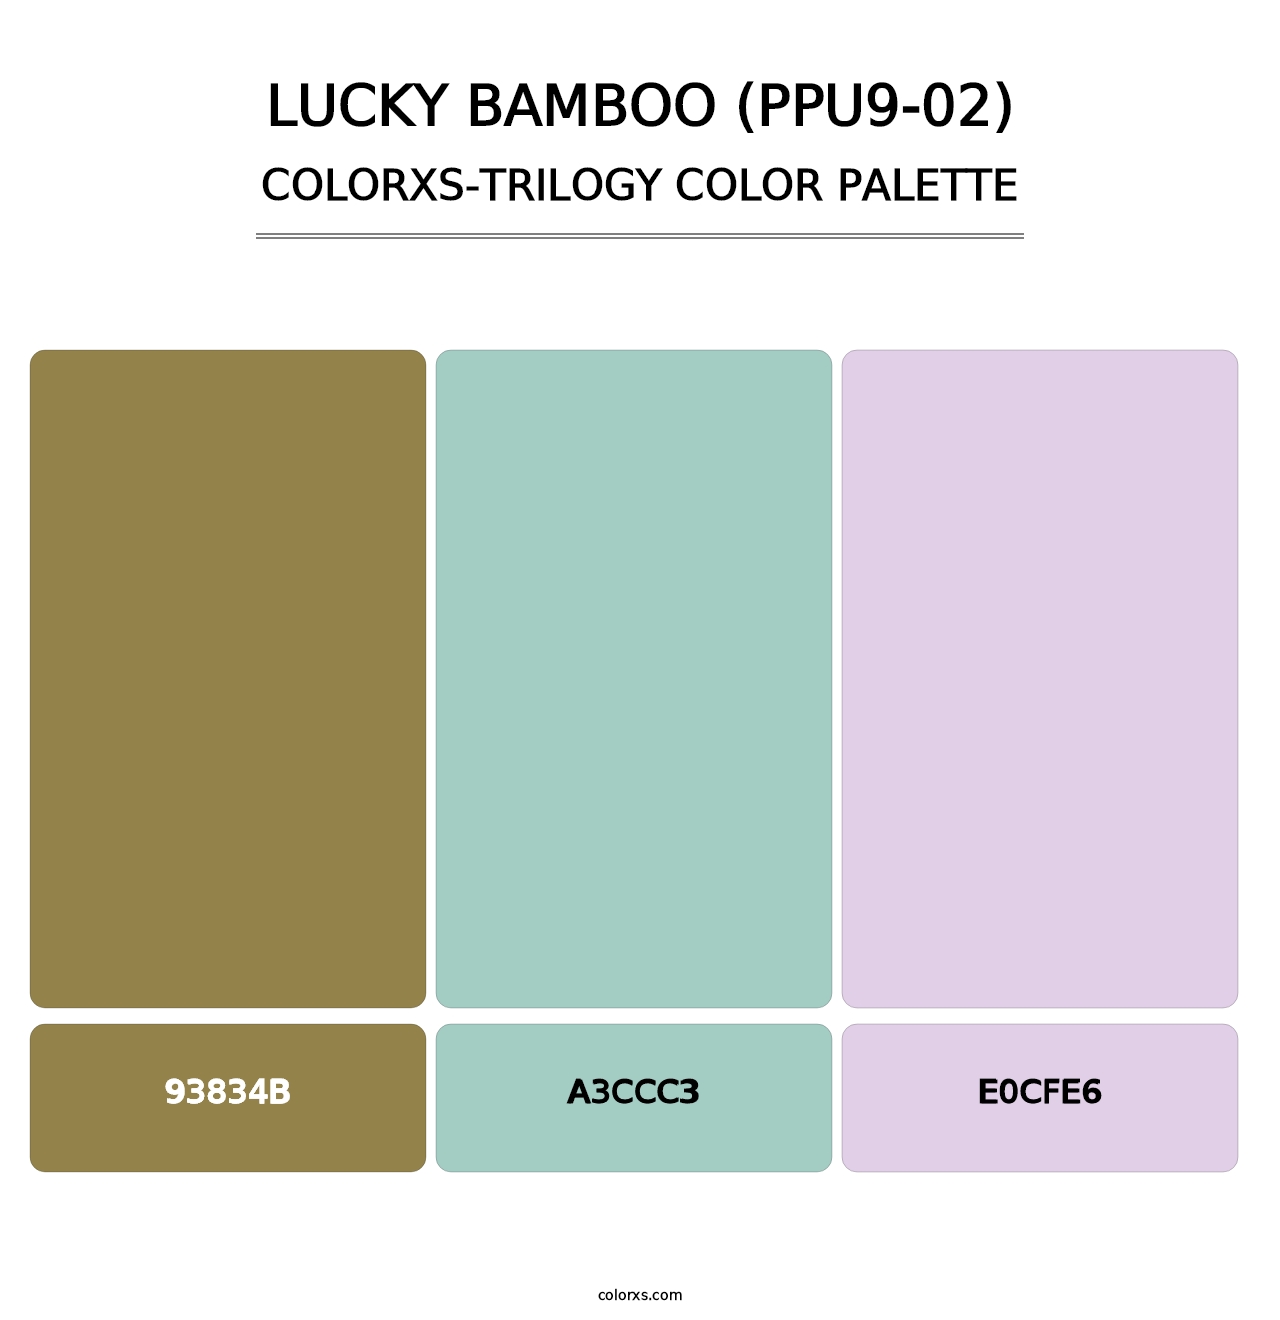 Lucky Bamboo (PPU9-02) - Colorxs Trilogy Palette